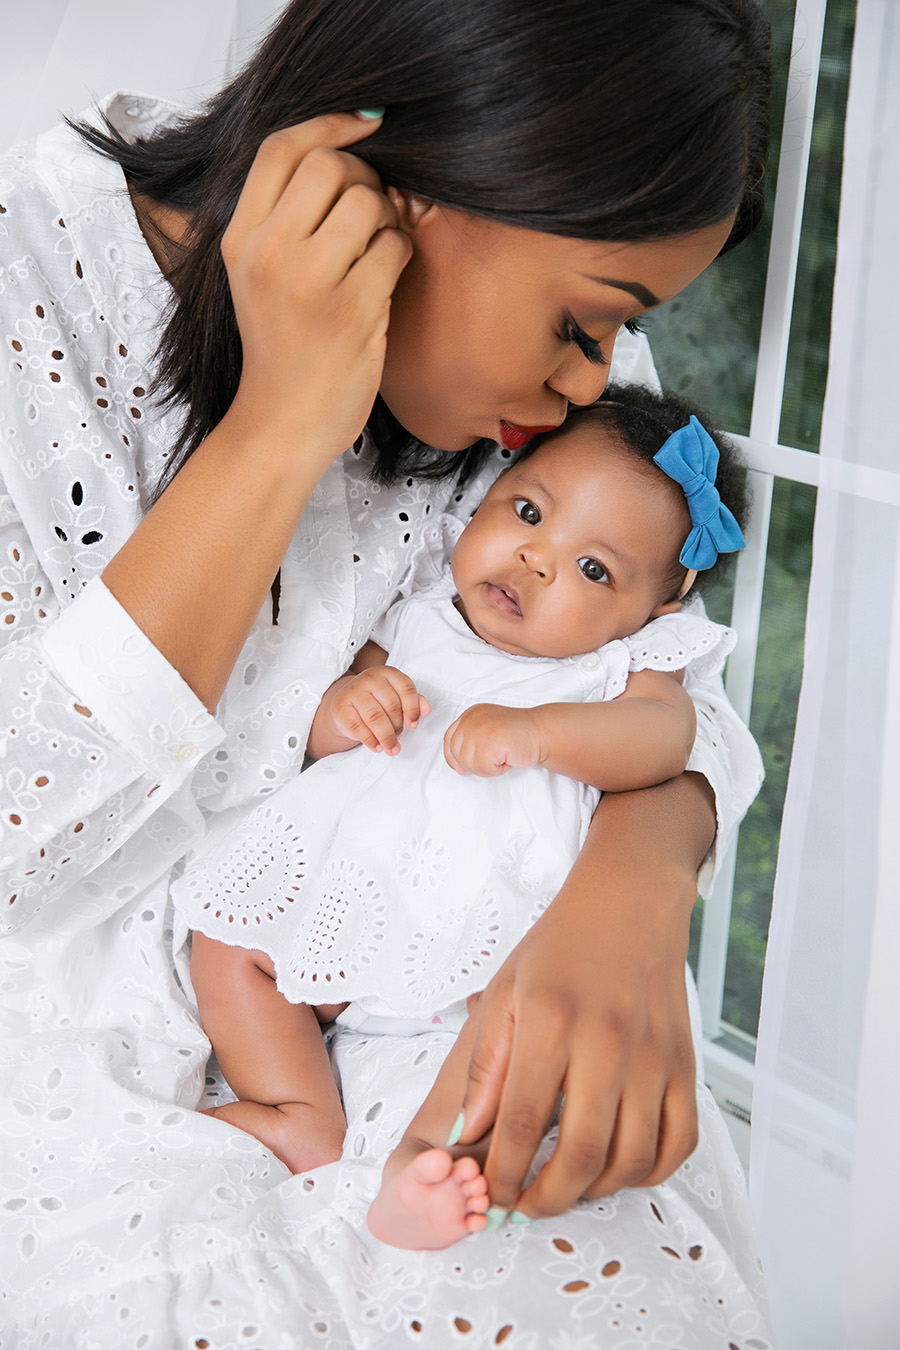 Stella-adewunmi-of jadore-fashion-shares-Rules-for-visiting-a-new-mom-and-gift-ideas-for-her